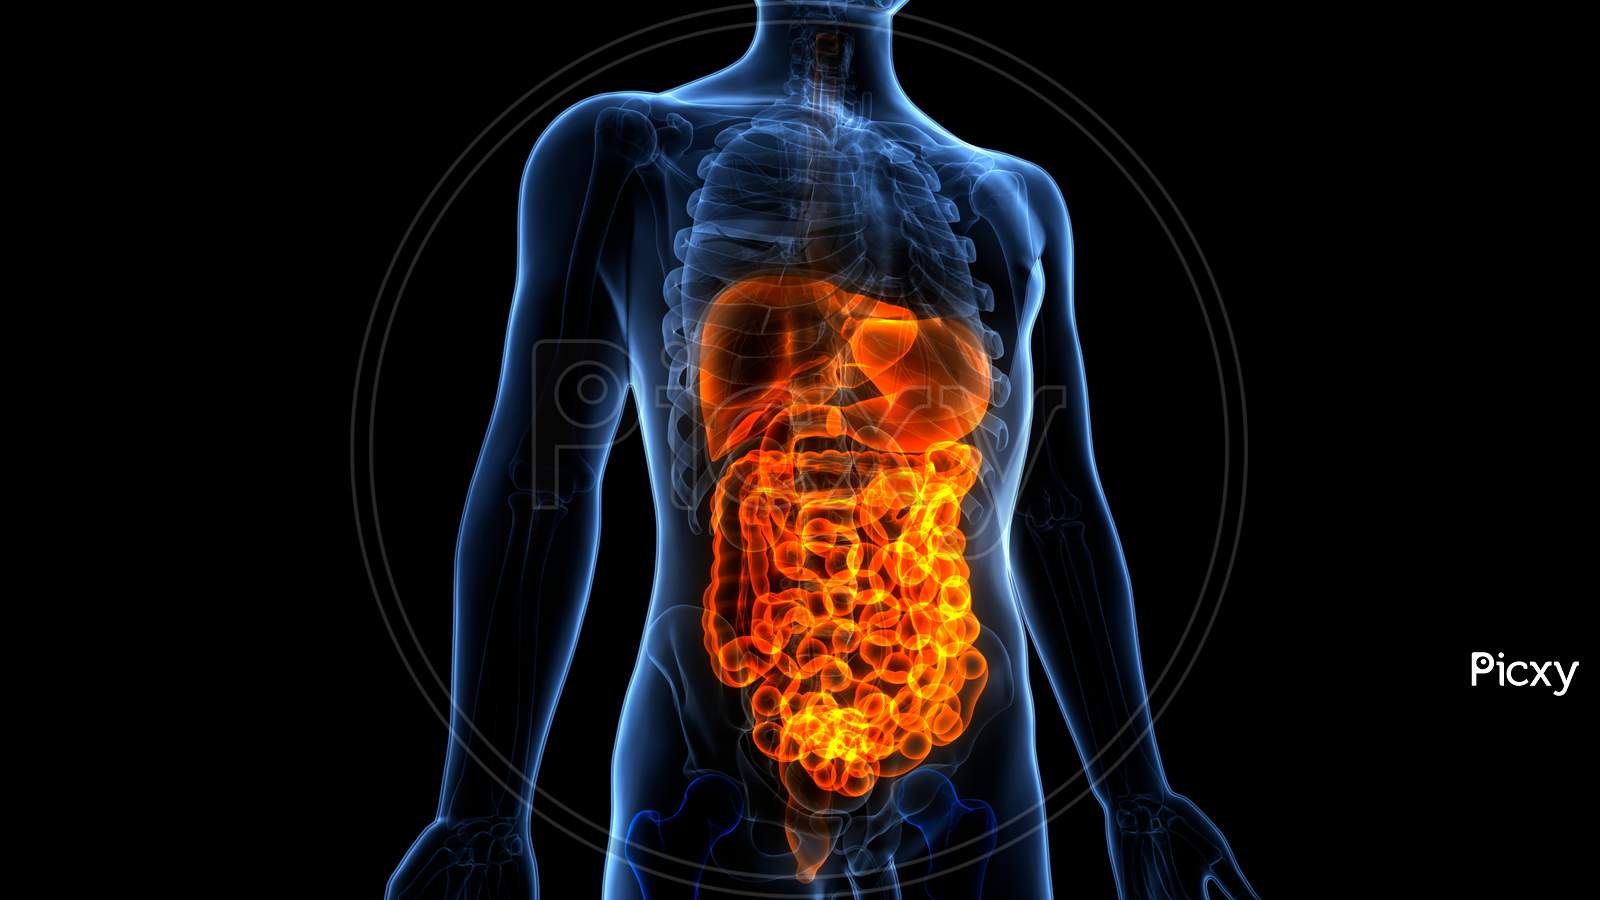 15800 Human Stomach Internal Organ Stock Photos Pictures  RoyaltyFree  Images  iStock